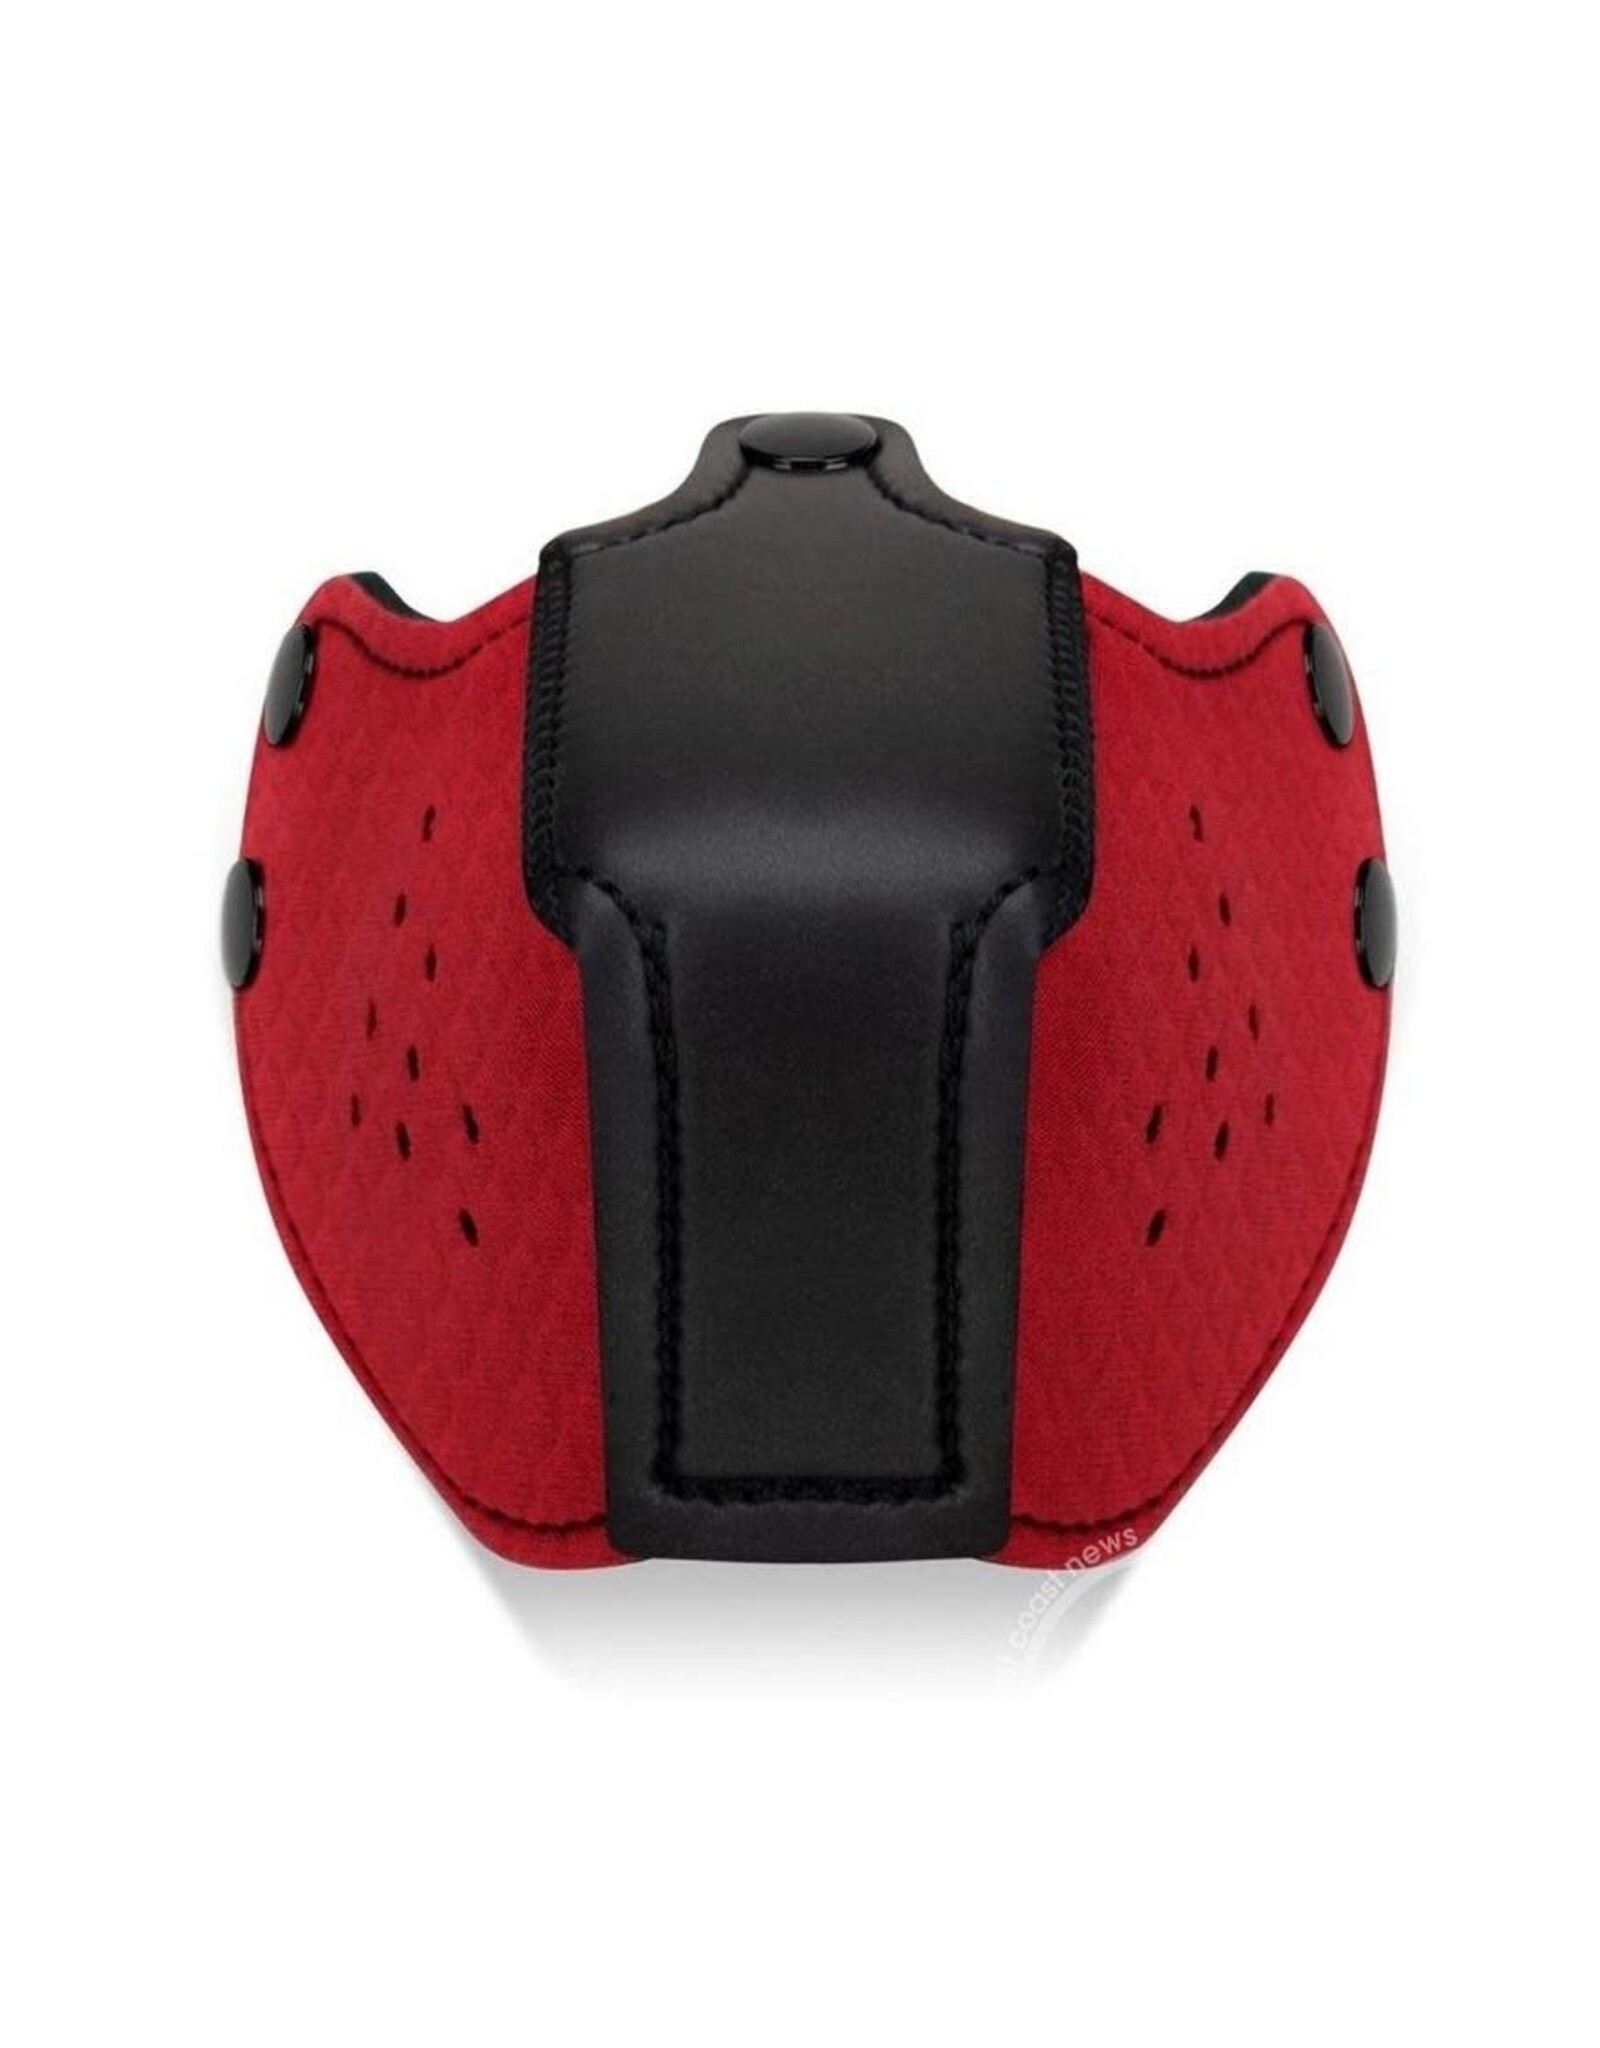 Prowler Prowler Red Puppy Muzzle